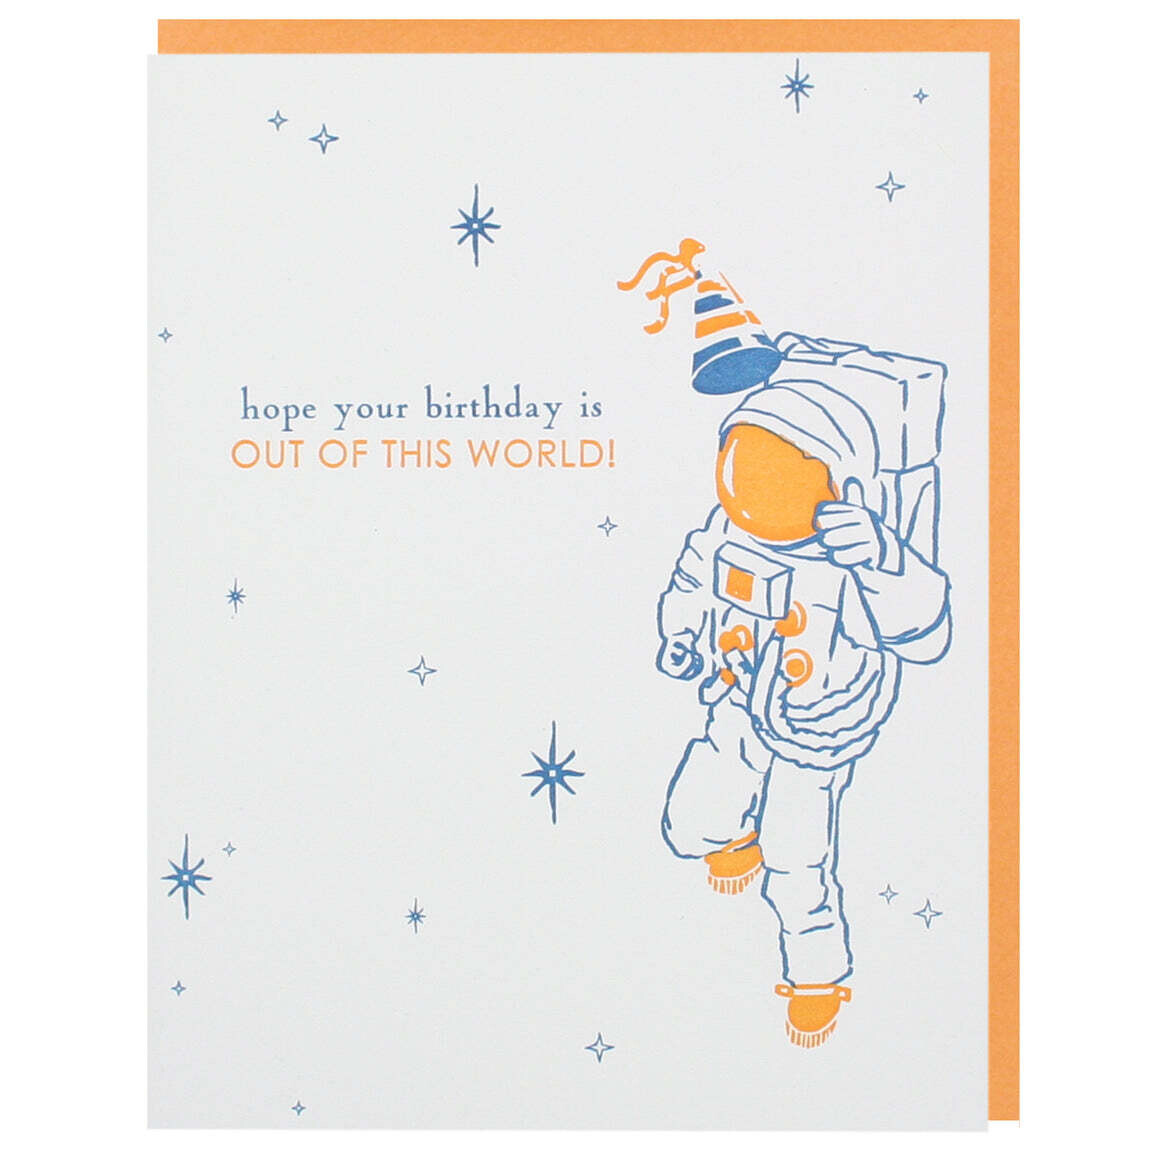 Out of this World Birthday card